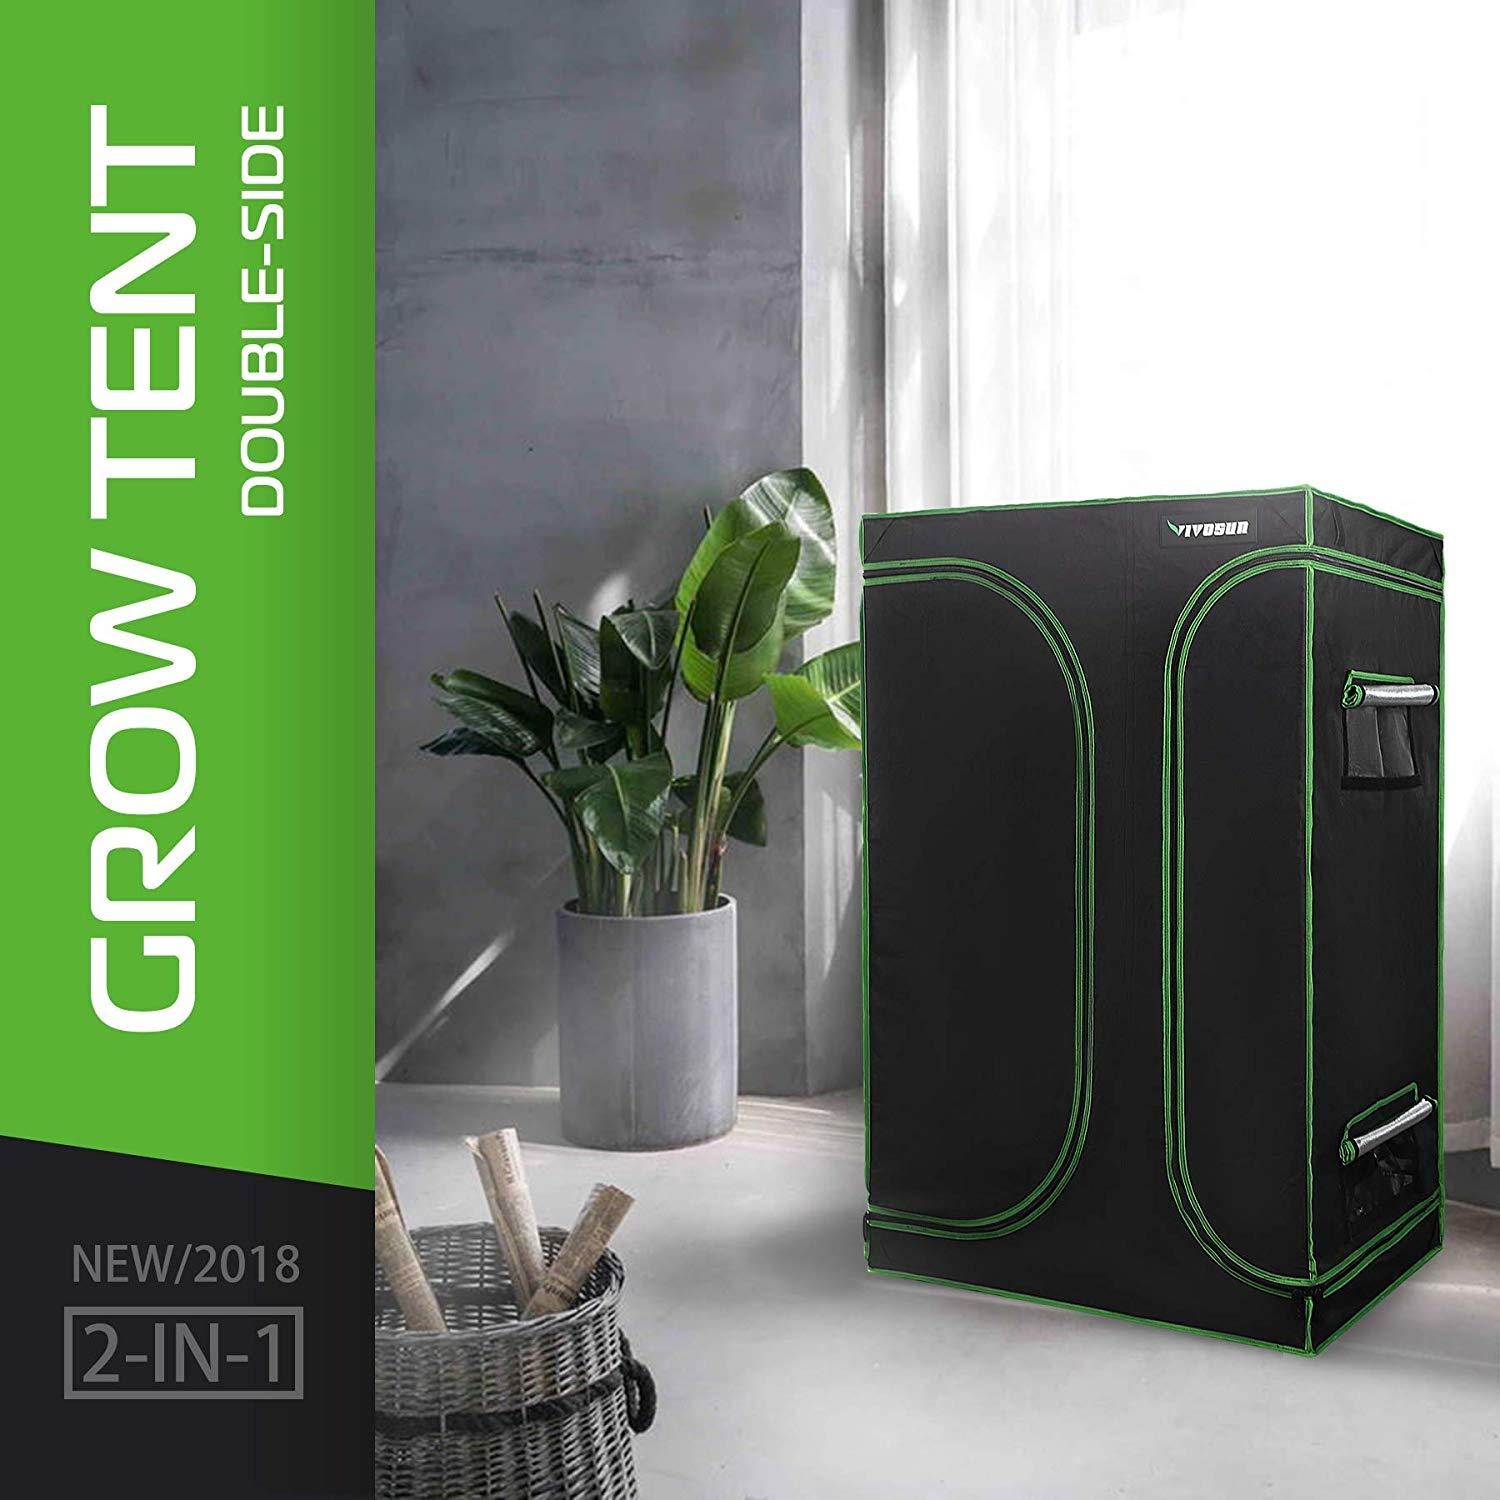 Vivosun 2 In 1 Indoor Grow Tent For Mylar Hydroponic And Soil Growpackage Com